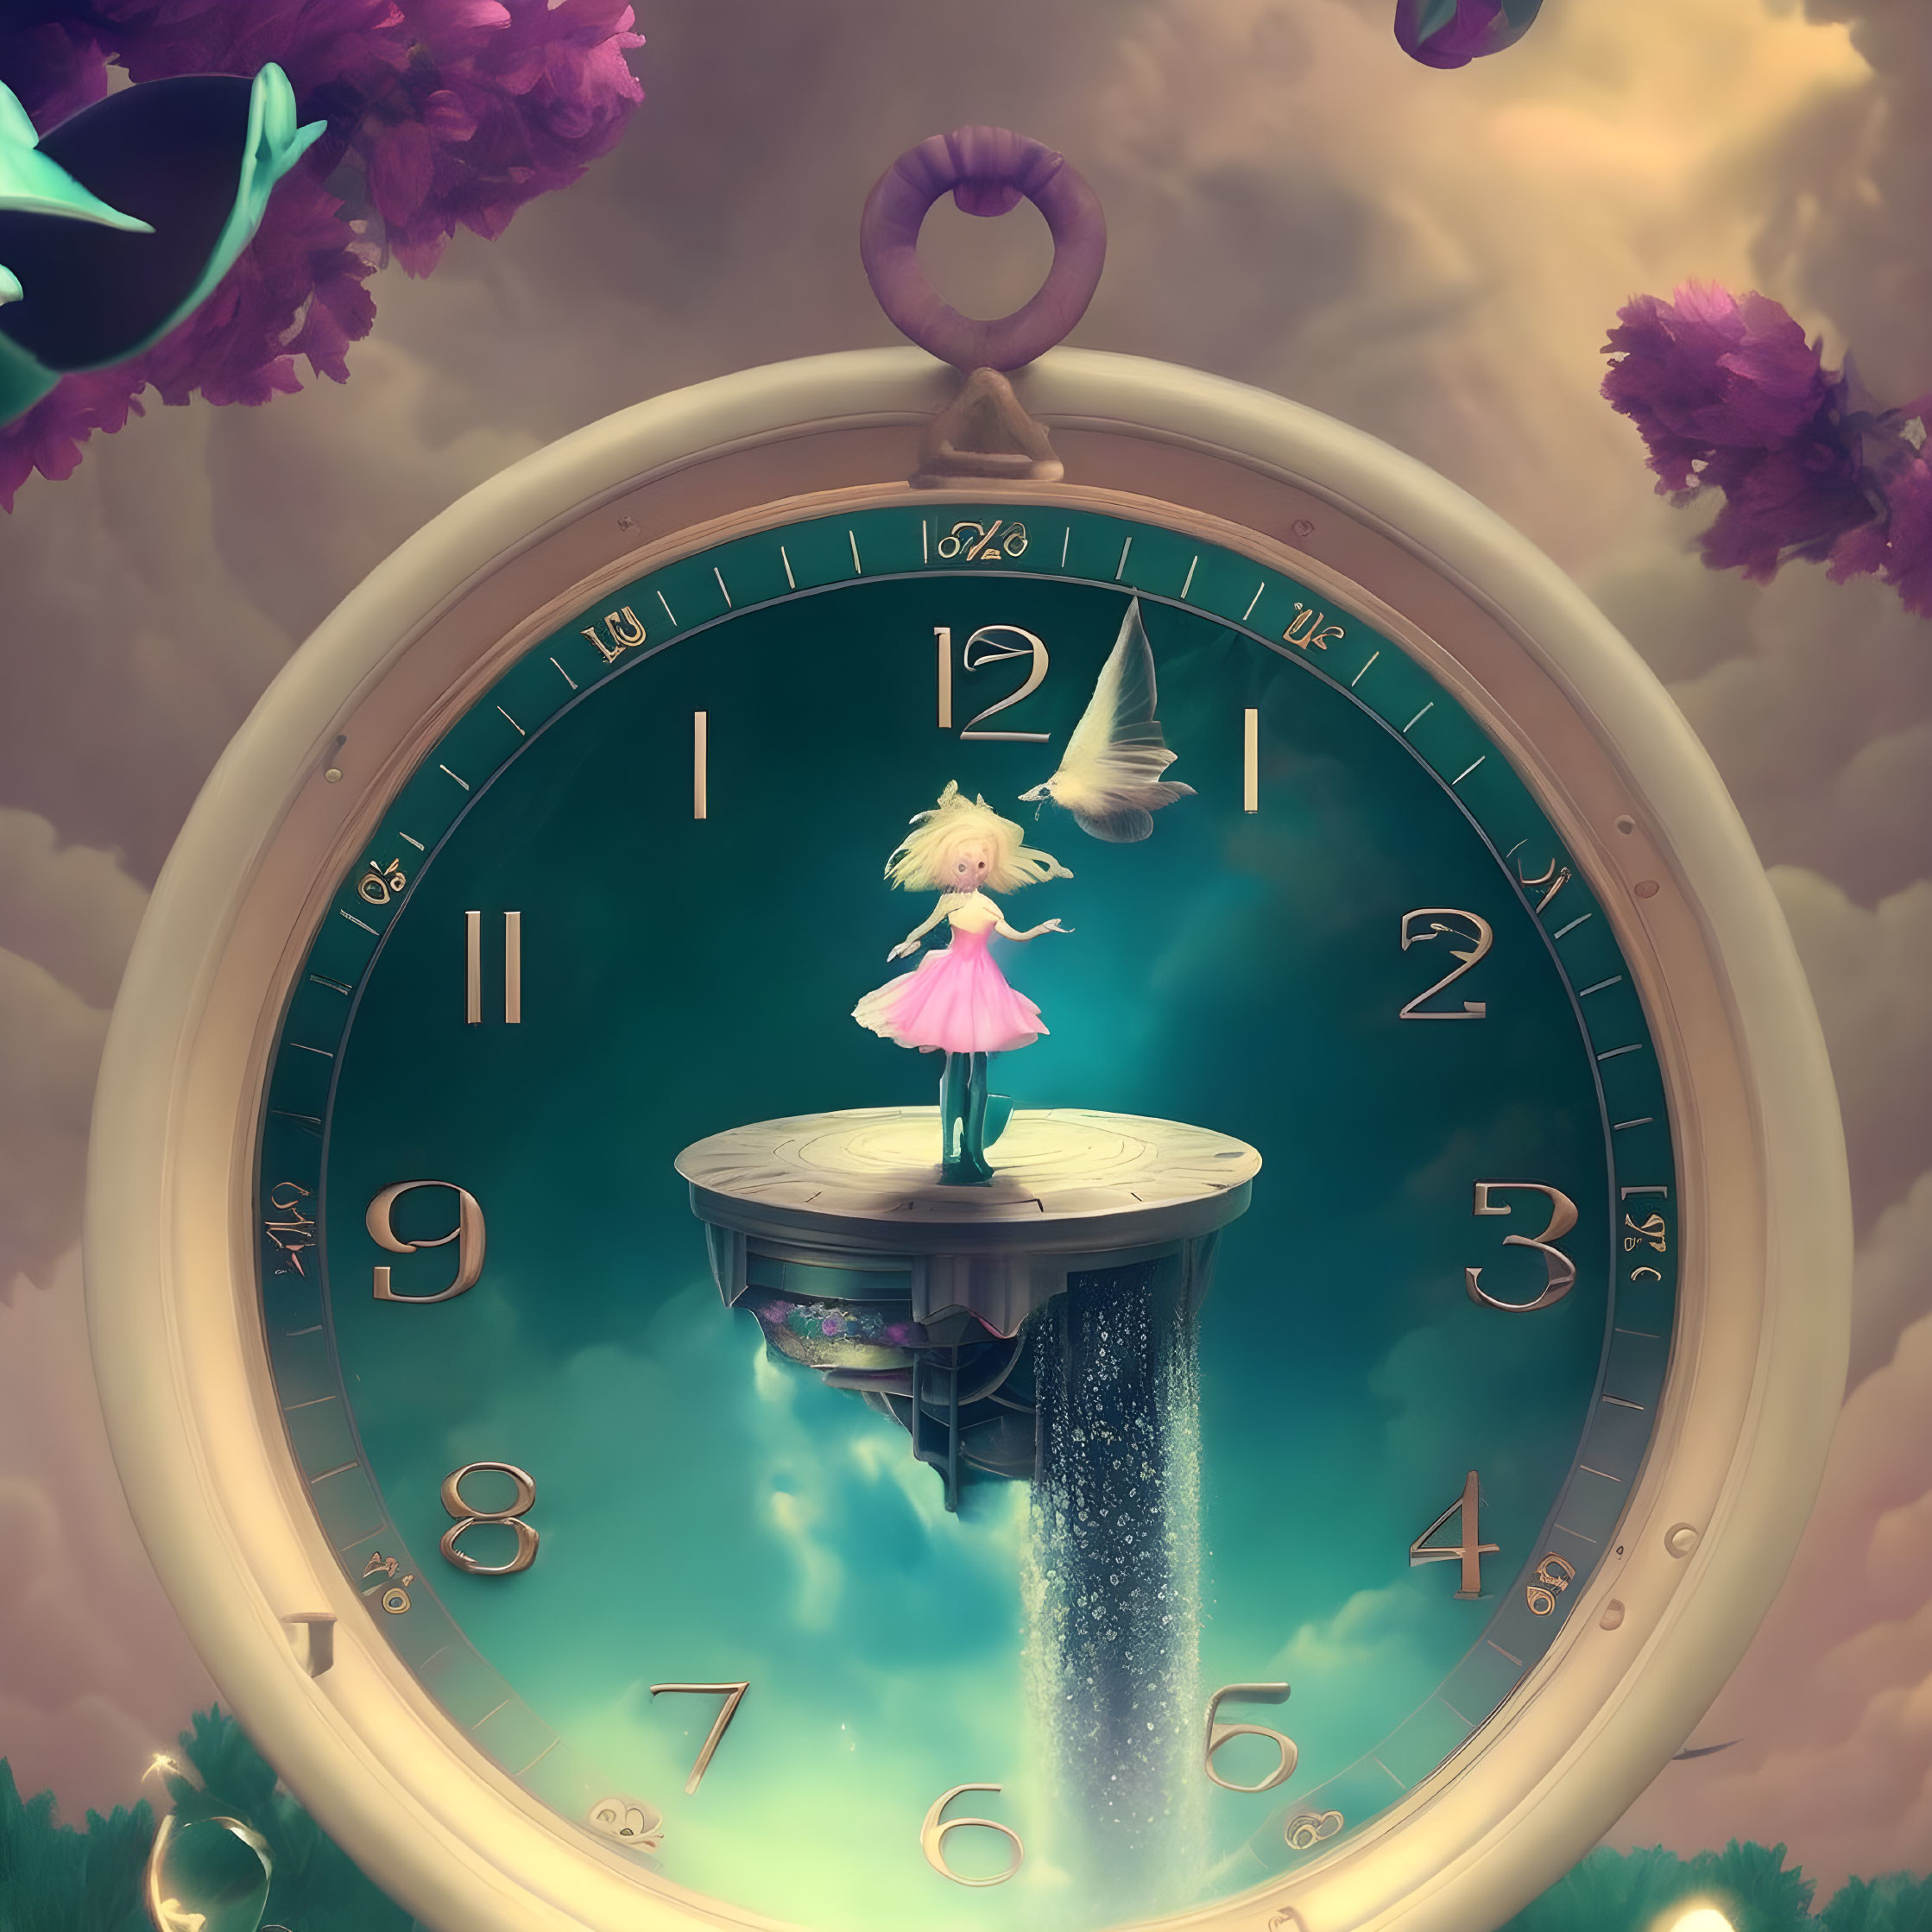 Whimsical girl on platform with clock face, floating islands, surreal sky